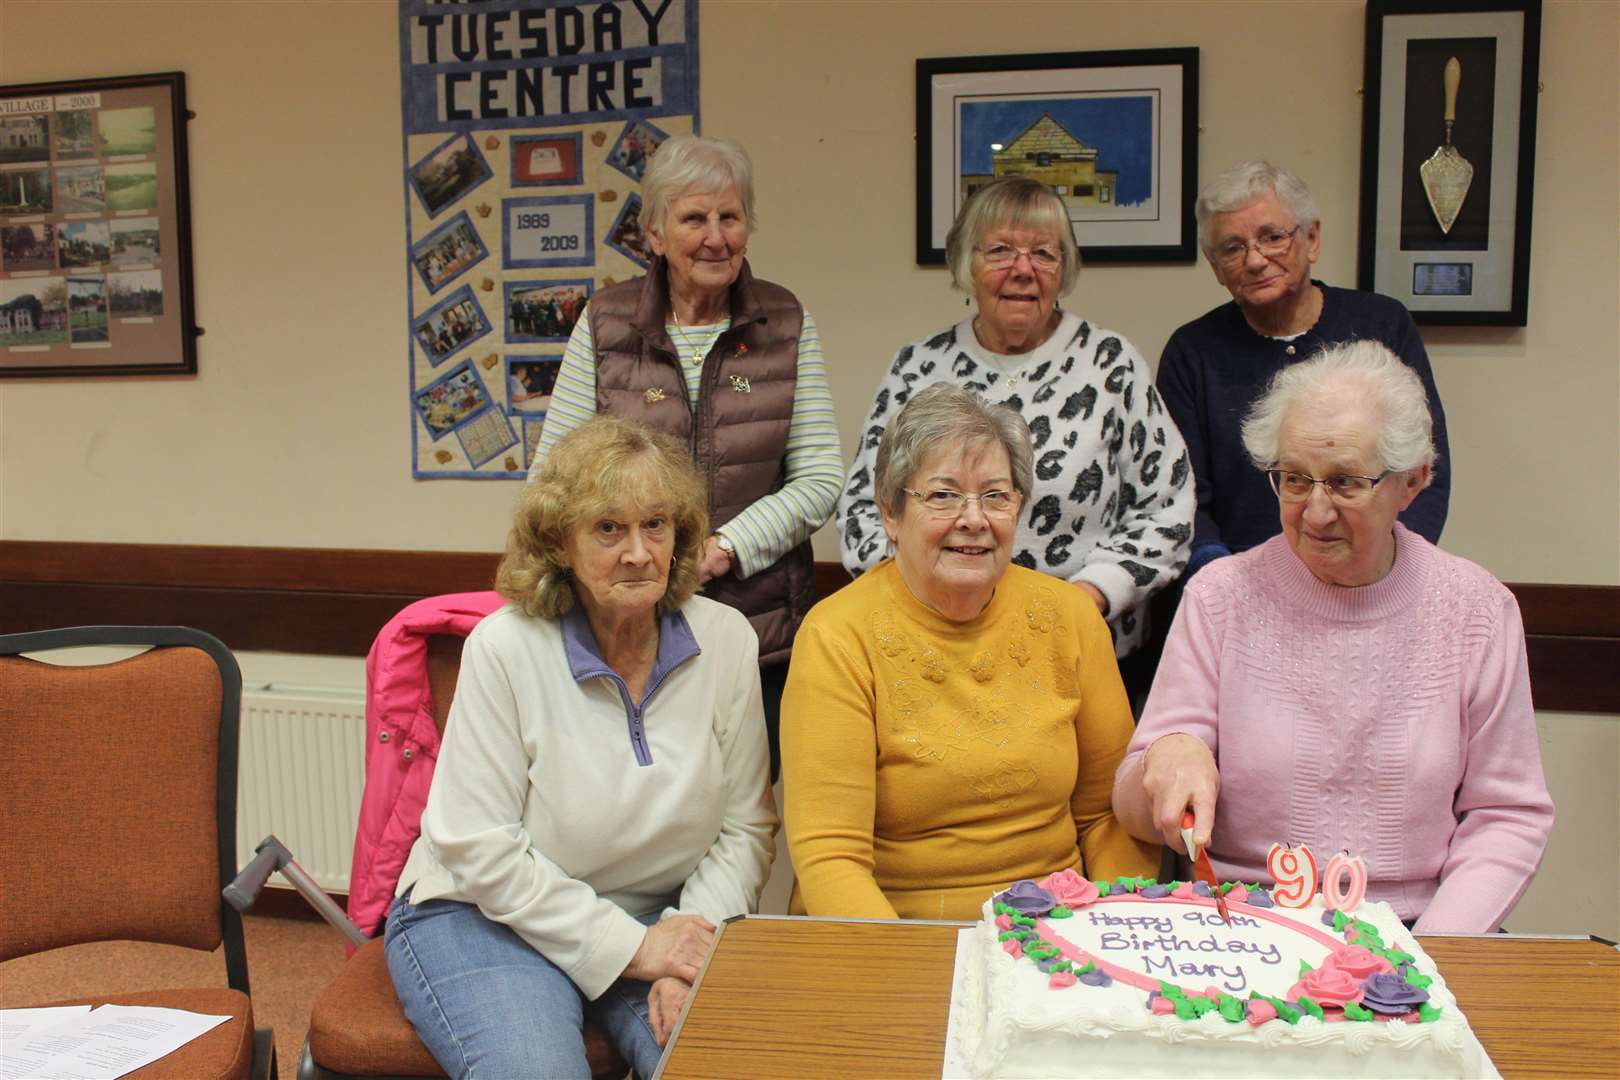 Tuesday centre convenor Mary Michie (front, right) was surprised by a beautiful birthday cake provided by her fellow members marking her 90th birthday on Friday 24th. Picture: Griselda McGregor